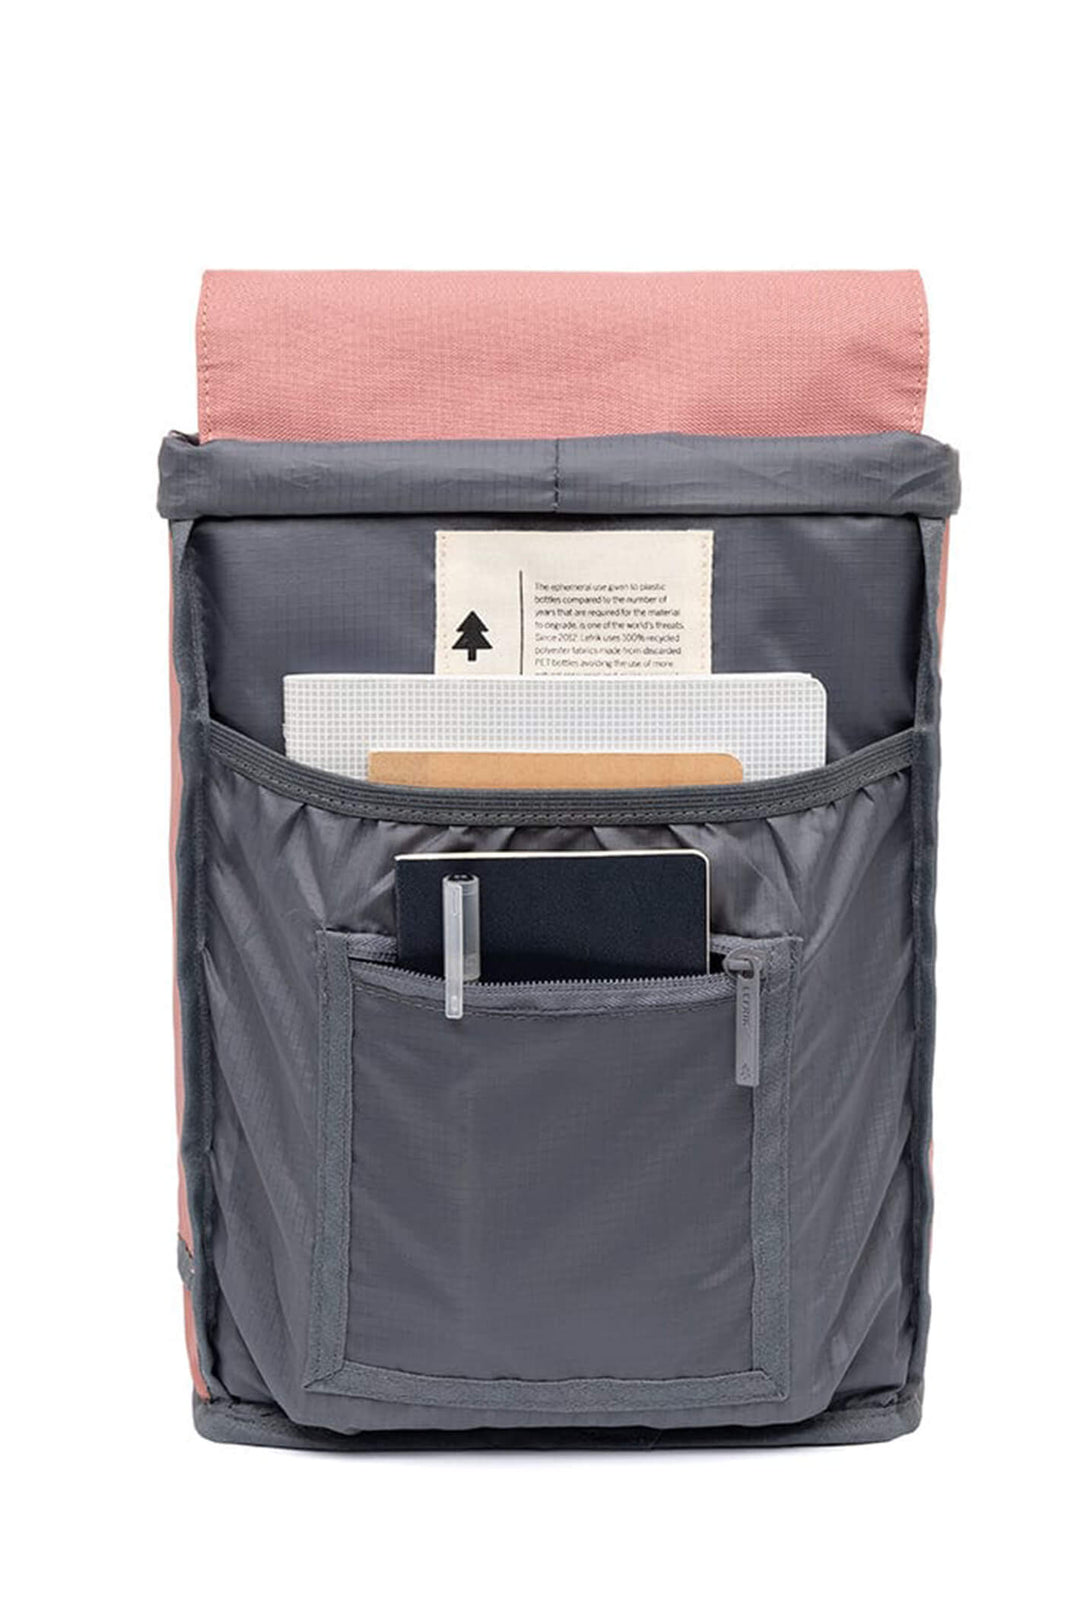 Lefrick Scout Mini Dusty Pink Packpack Bag - Shirley Allum Boutique